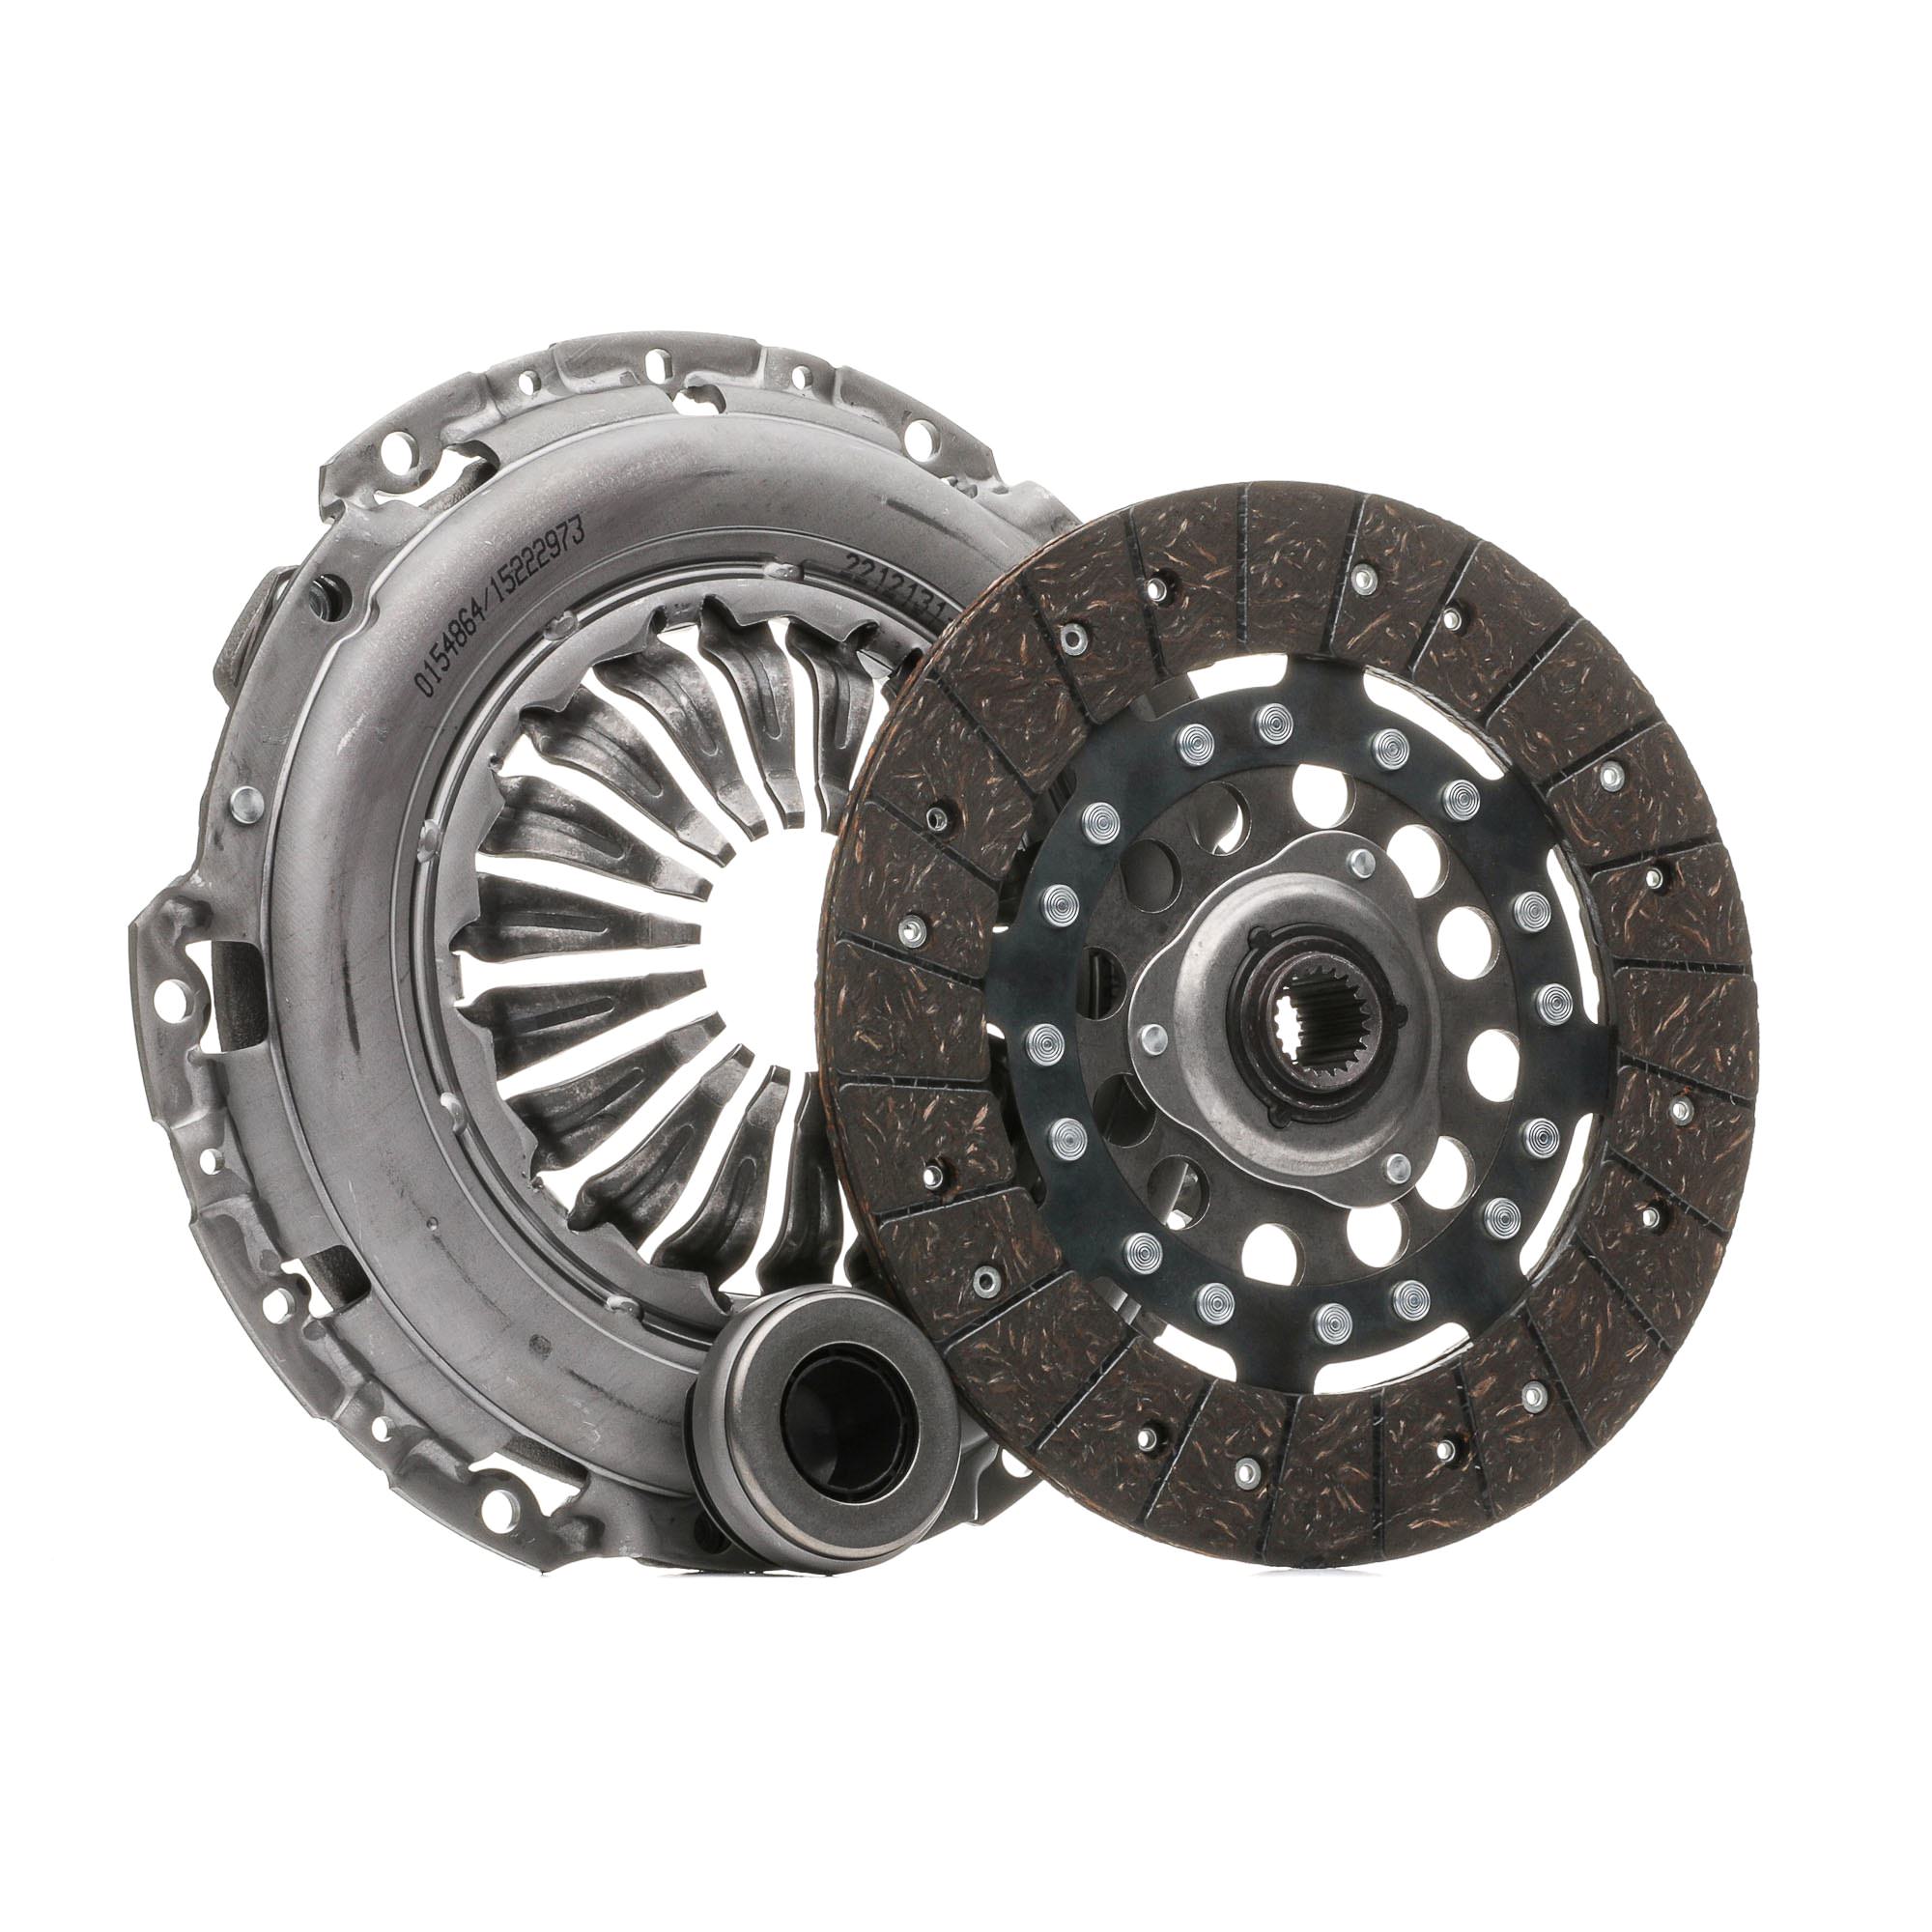 STARK SKCK-0100392 Clutch kit CITROËN experience and price